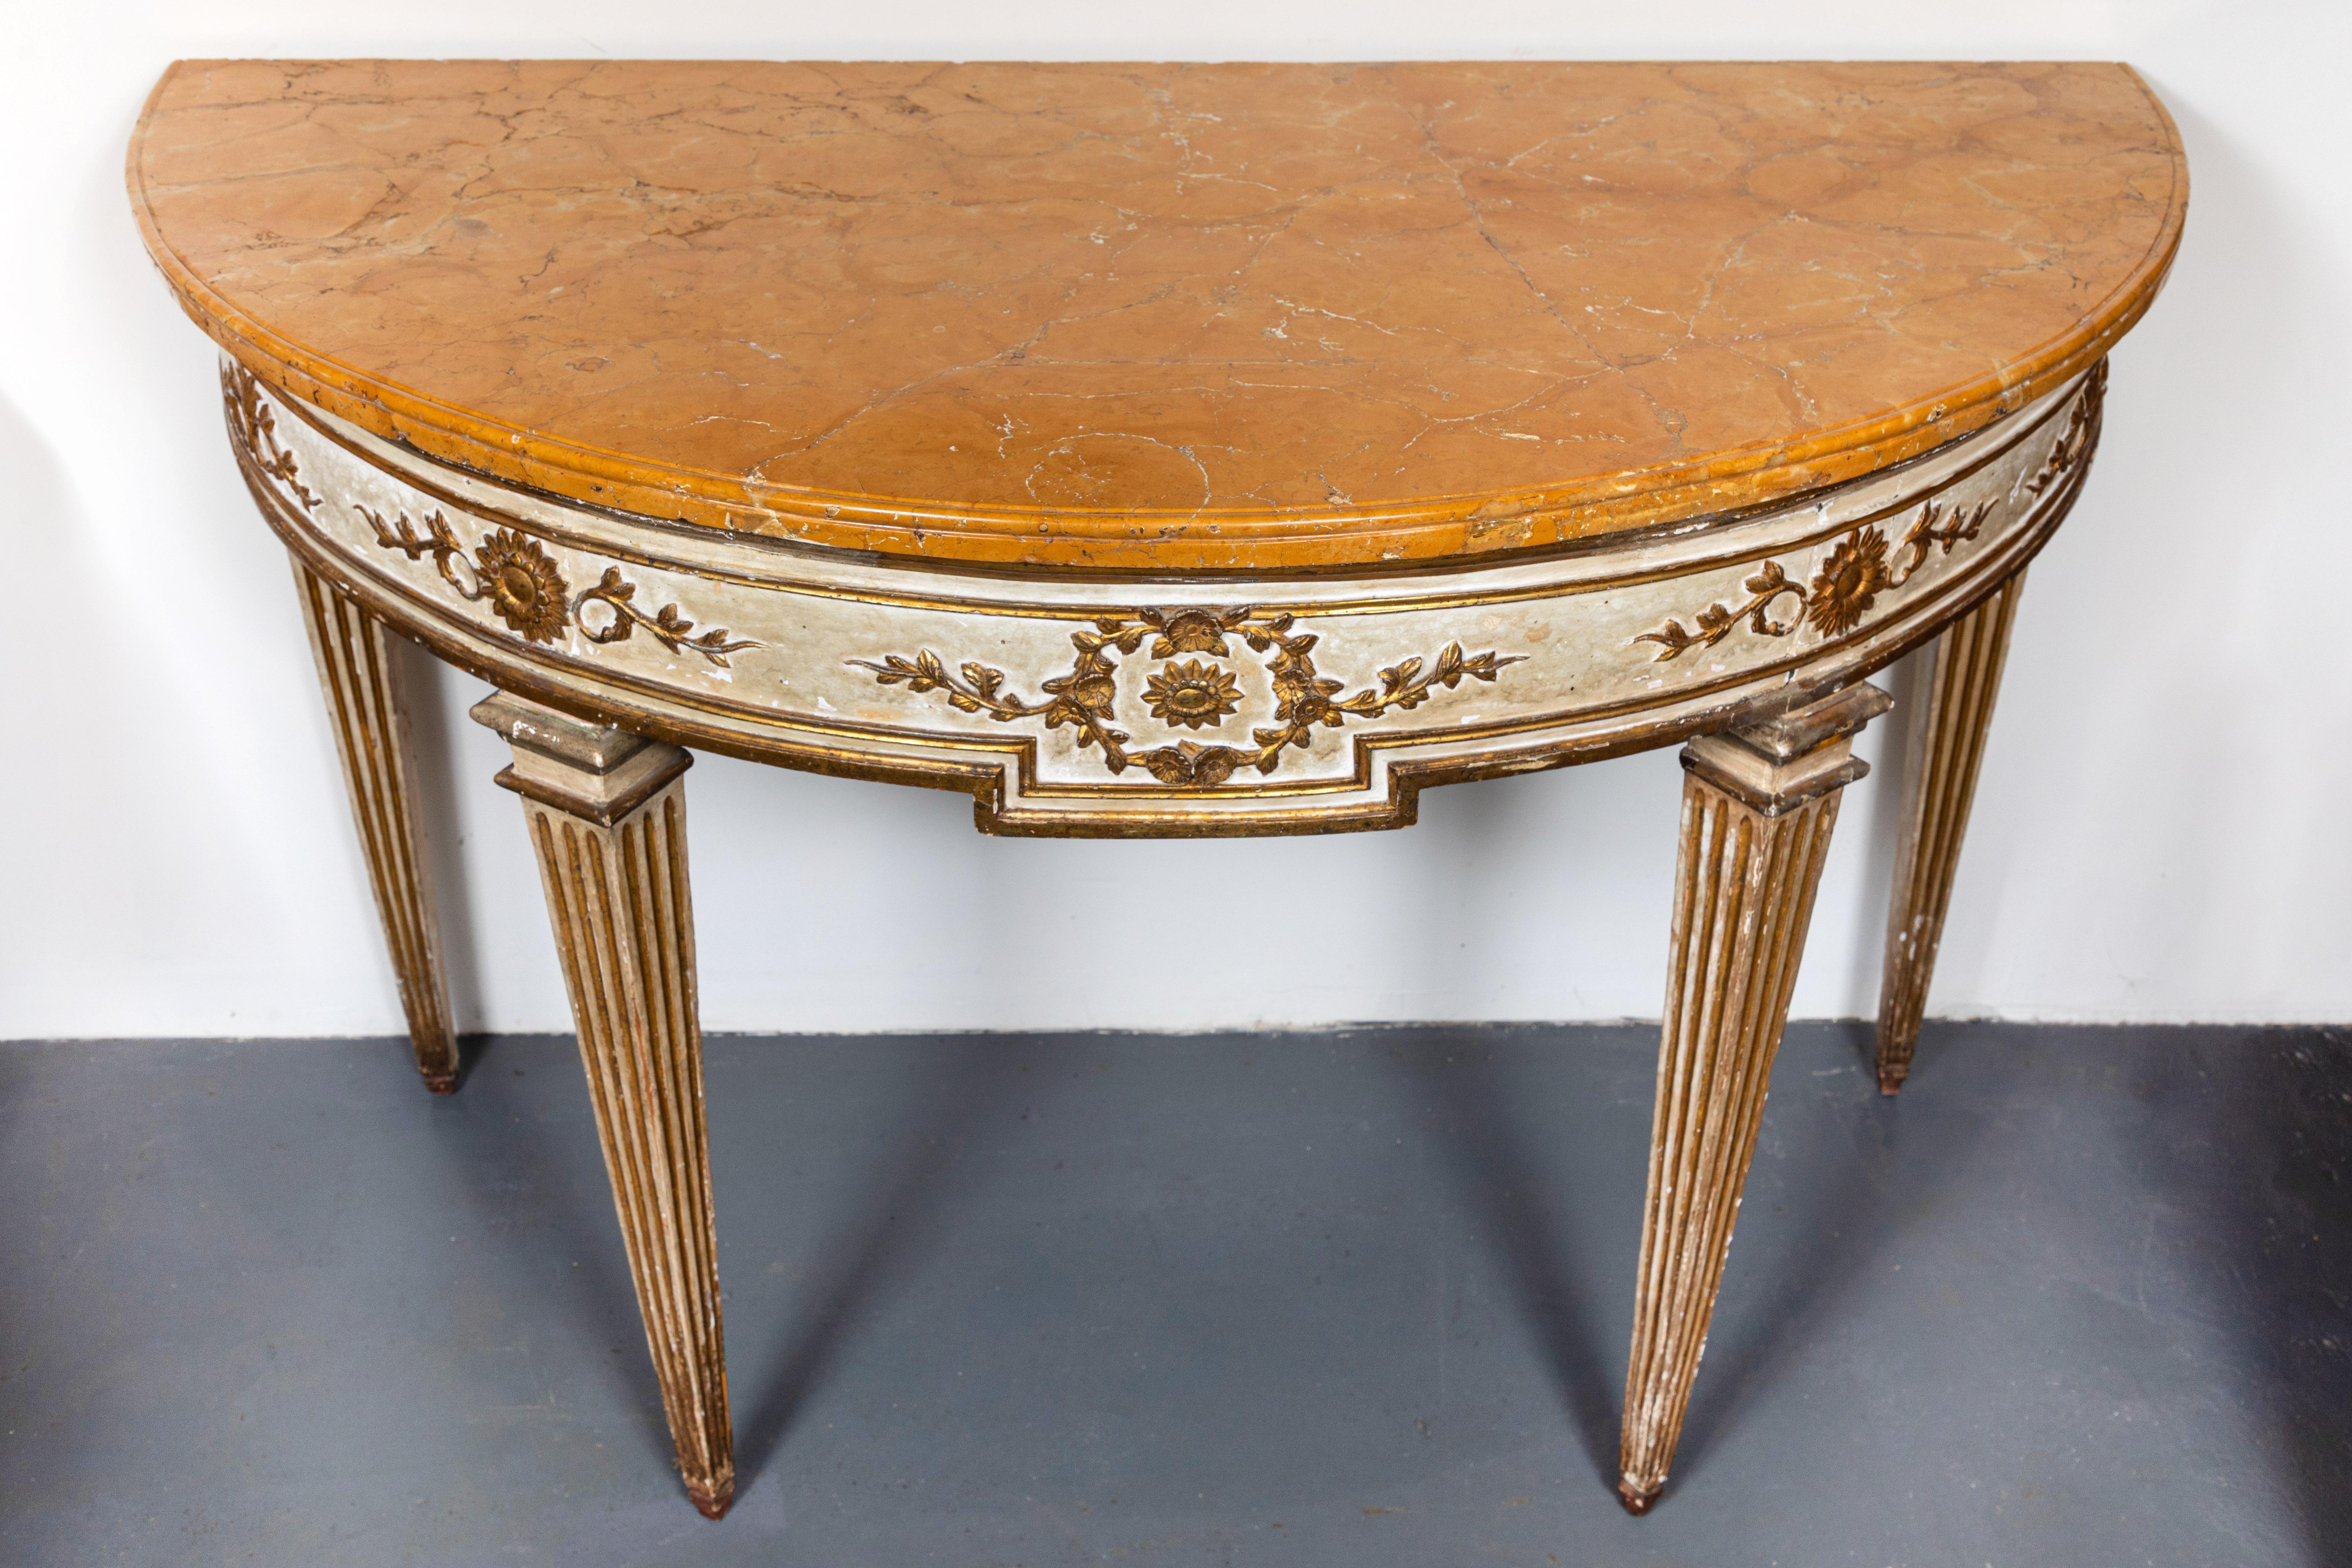 Pair of early 19th century, hand carved, painted and gilded, Italian neoclassical demilunes on fluted, tapered legs, surmounted by vibrant Siena marble tops. Each with aprons embellished with foliate vignettes and medallions.